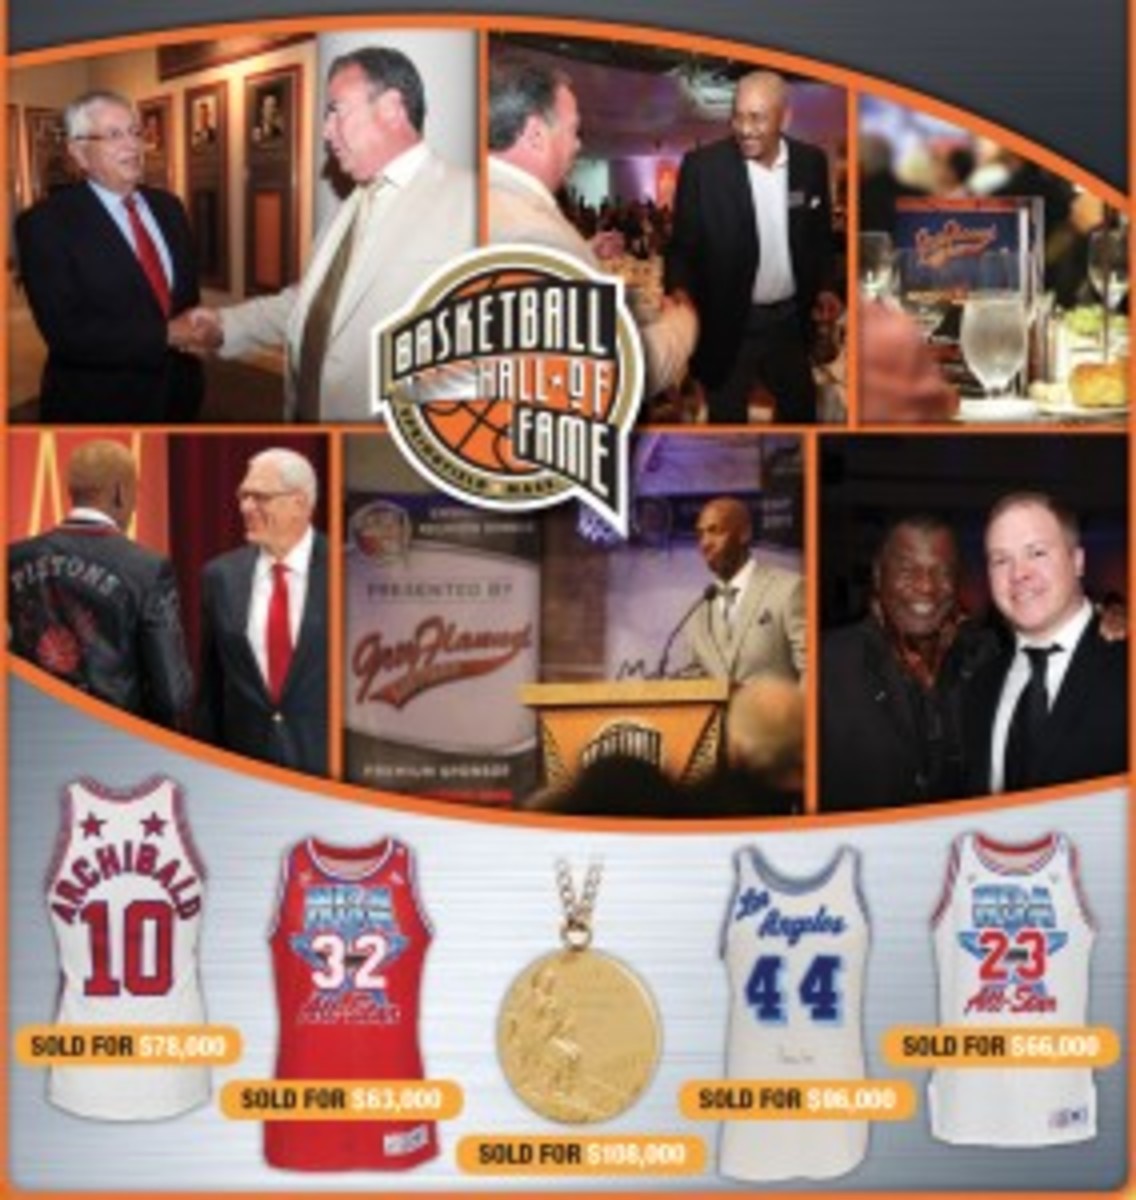  A montage of highlights and memorable moments from past Induction events at the Naismith Memorial Basketball Hall of Fame. Grey Flannel Auctions image.